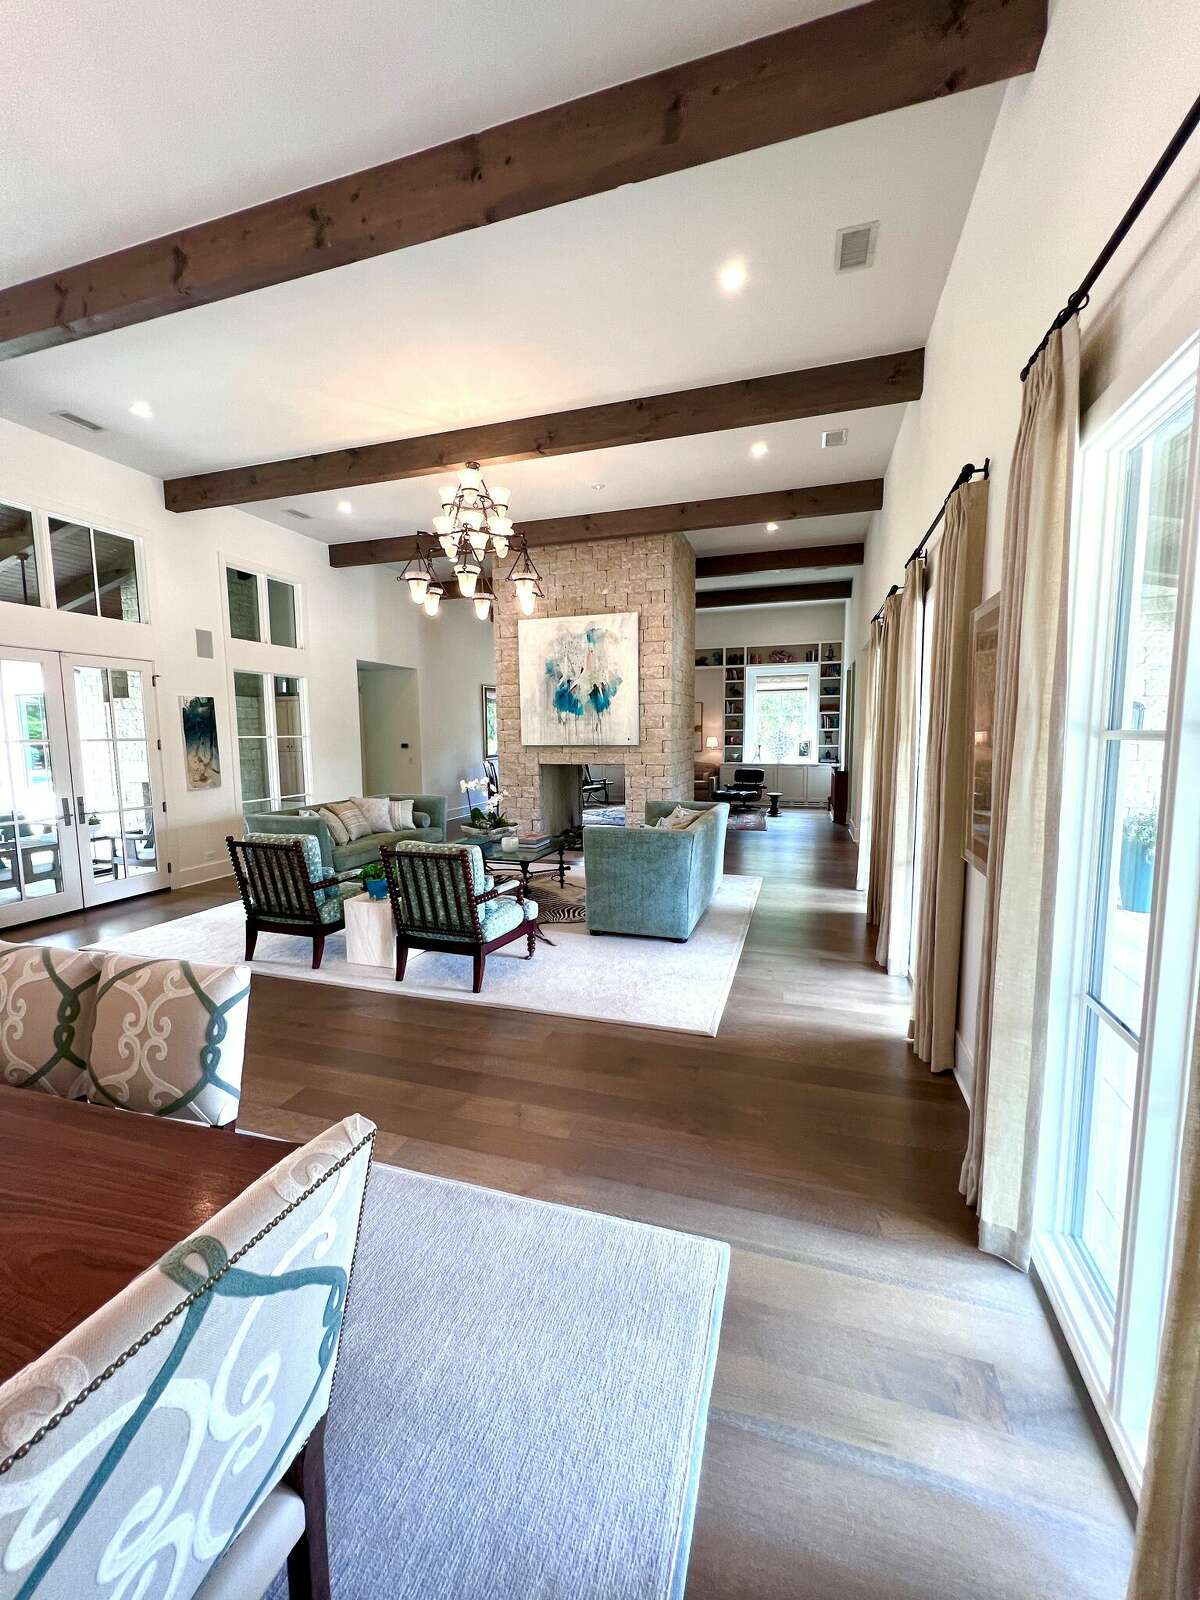 The heart of the house is the great room. Measuring more than 55 feet long and 23 feet wide with 14-foot ceilings, it encompasses the kitchen, dining and living areas, a large see-through fireplace and an informal study/TV space.